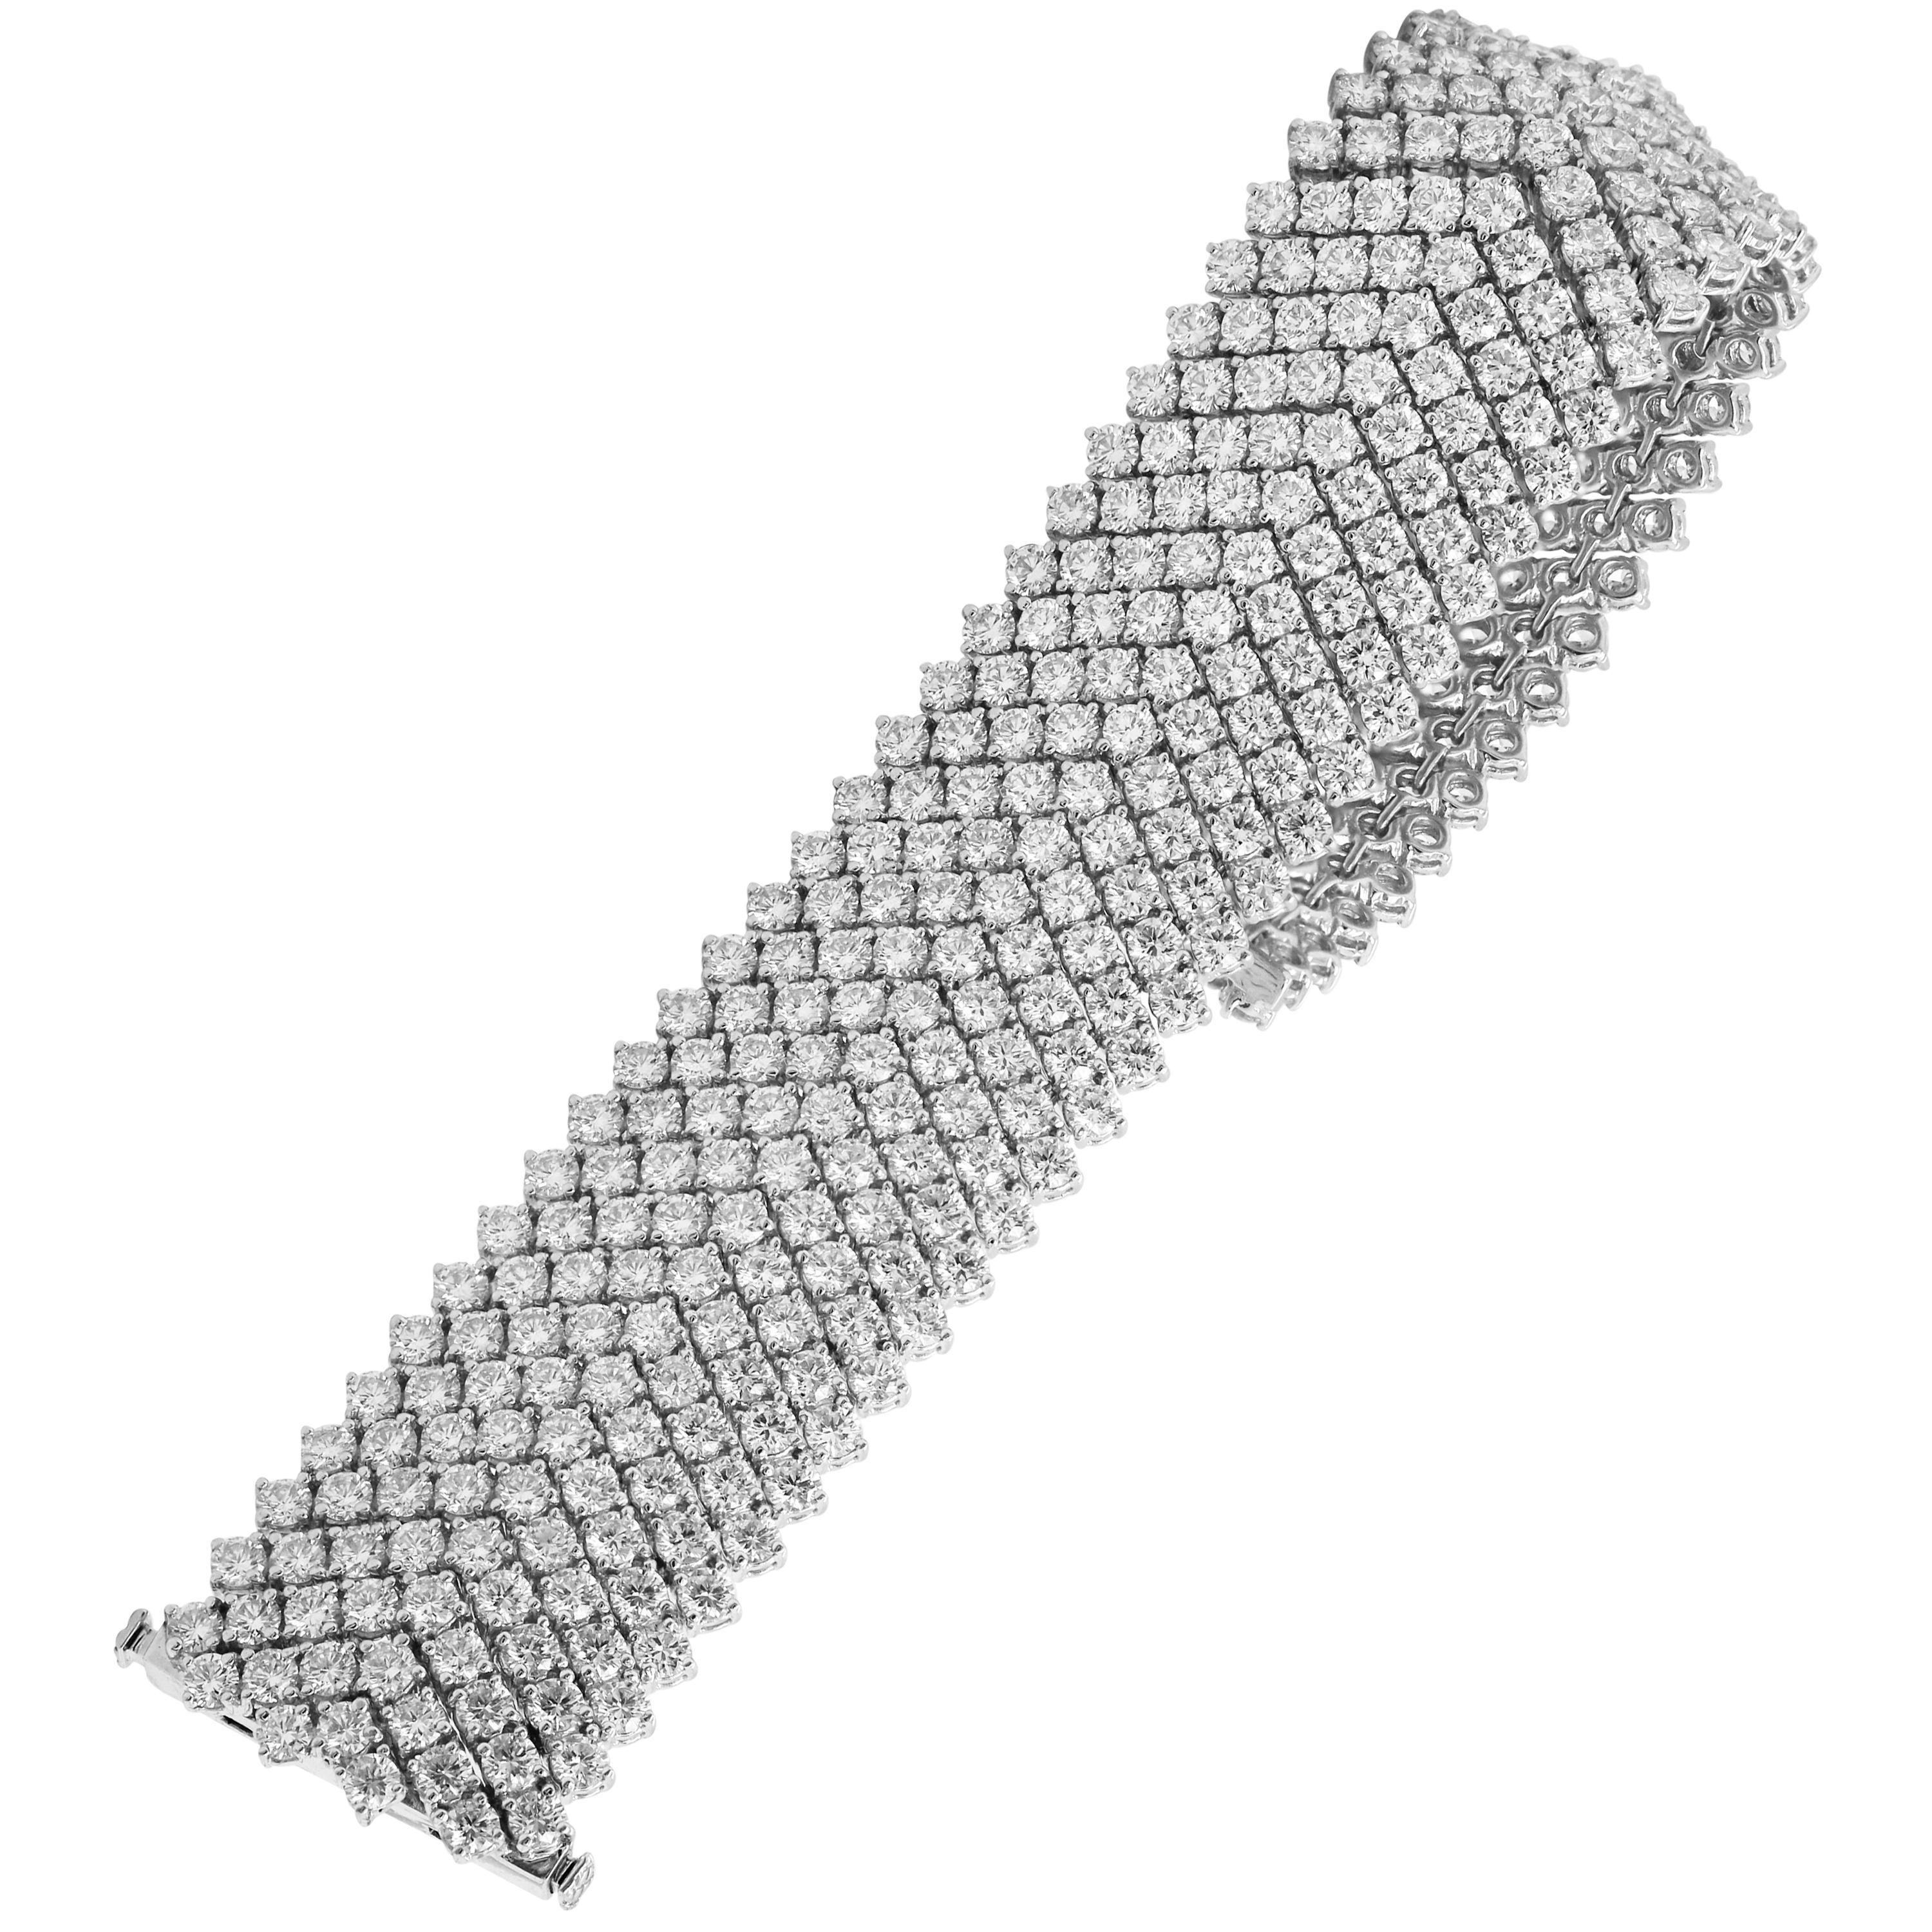 34.63 Carat Diamond 18K White Gold Nine Row Wide Tennis Bracelet

This Nine row tennis bracelet is set entirely with diamonds.

34.63 carat G color, VS clarity diamonds

7 inches in length. 0.86 inch width.

75.20 grams total weight